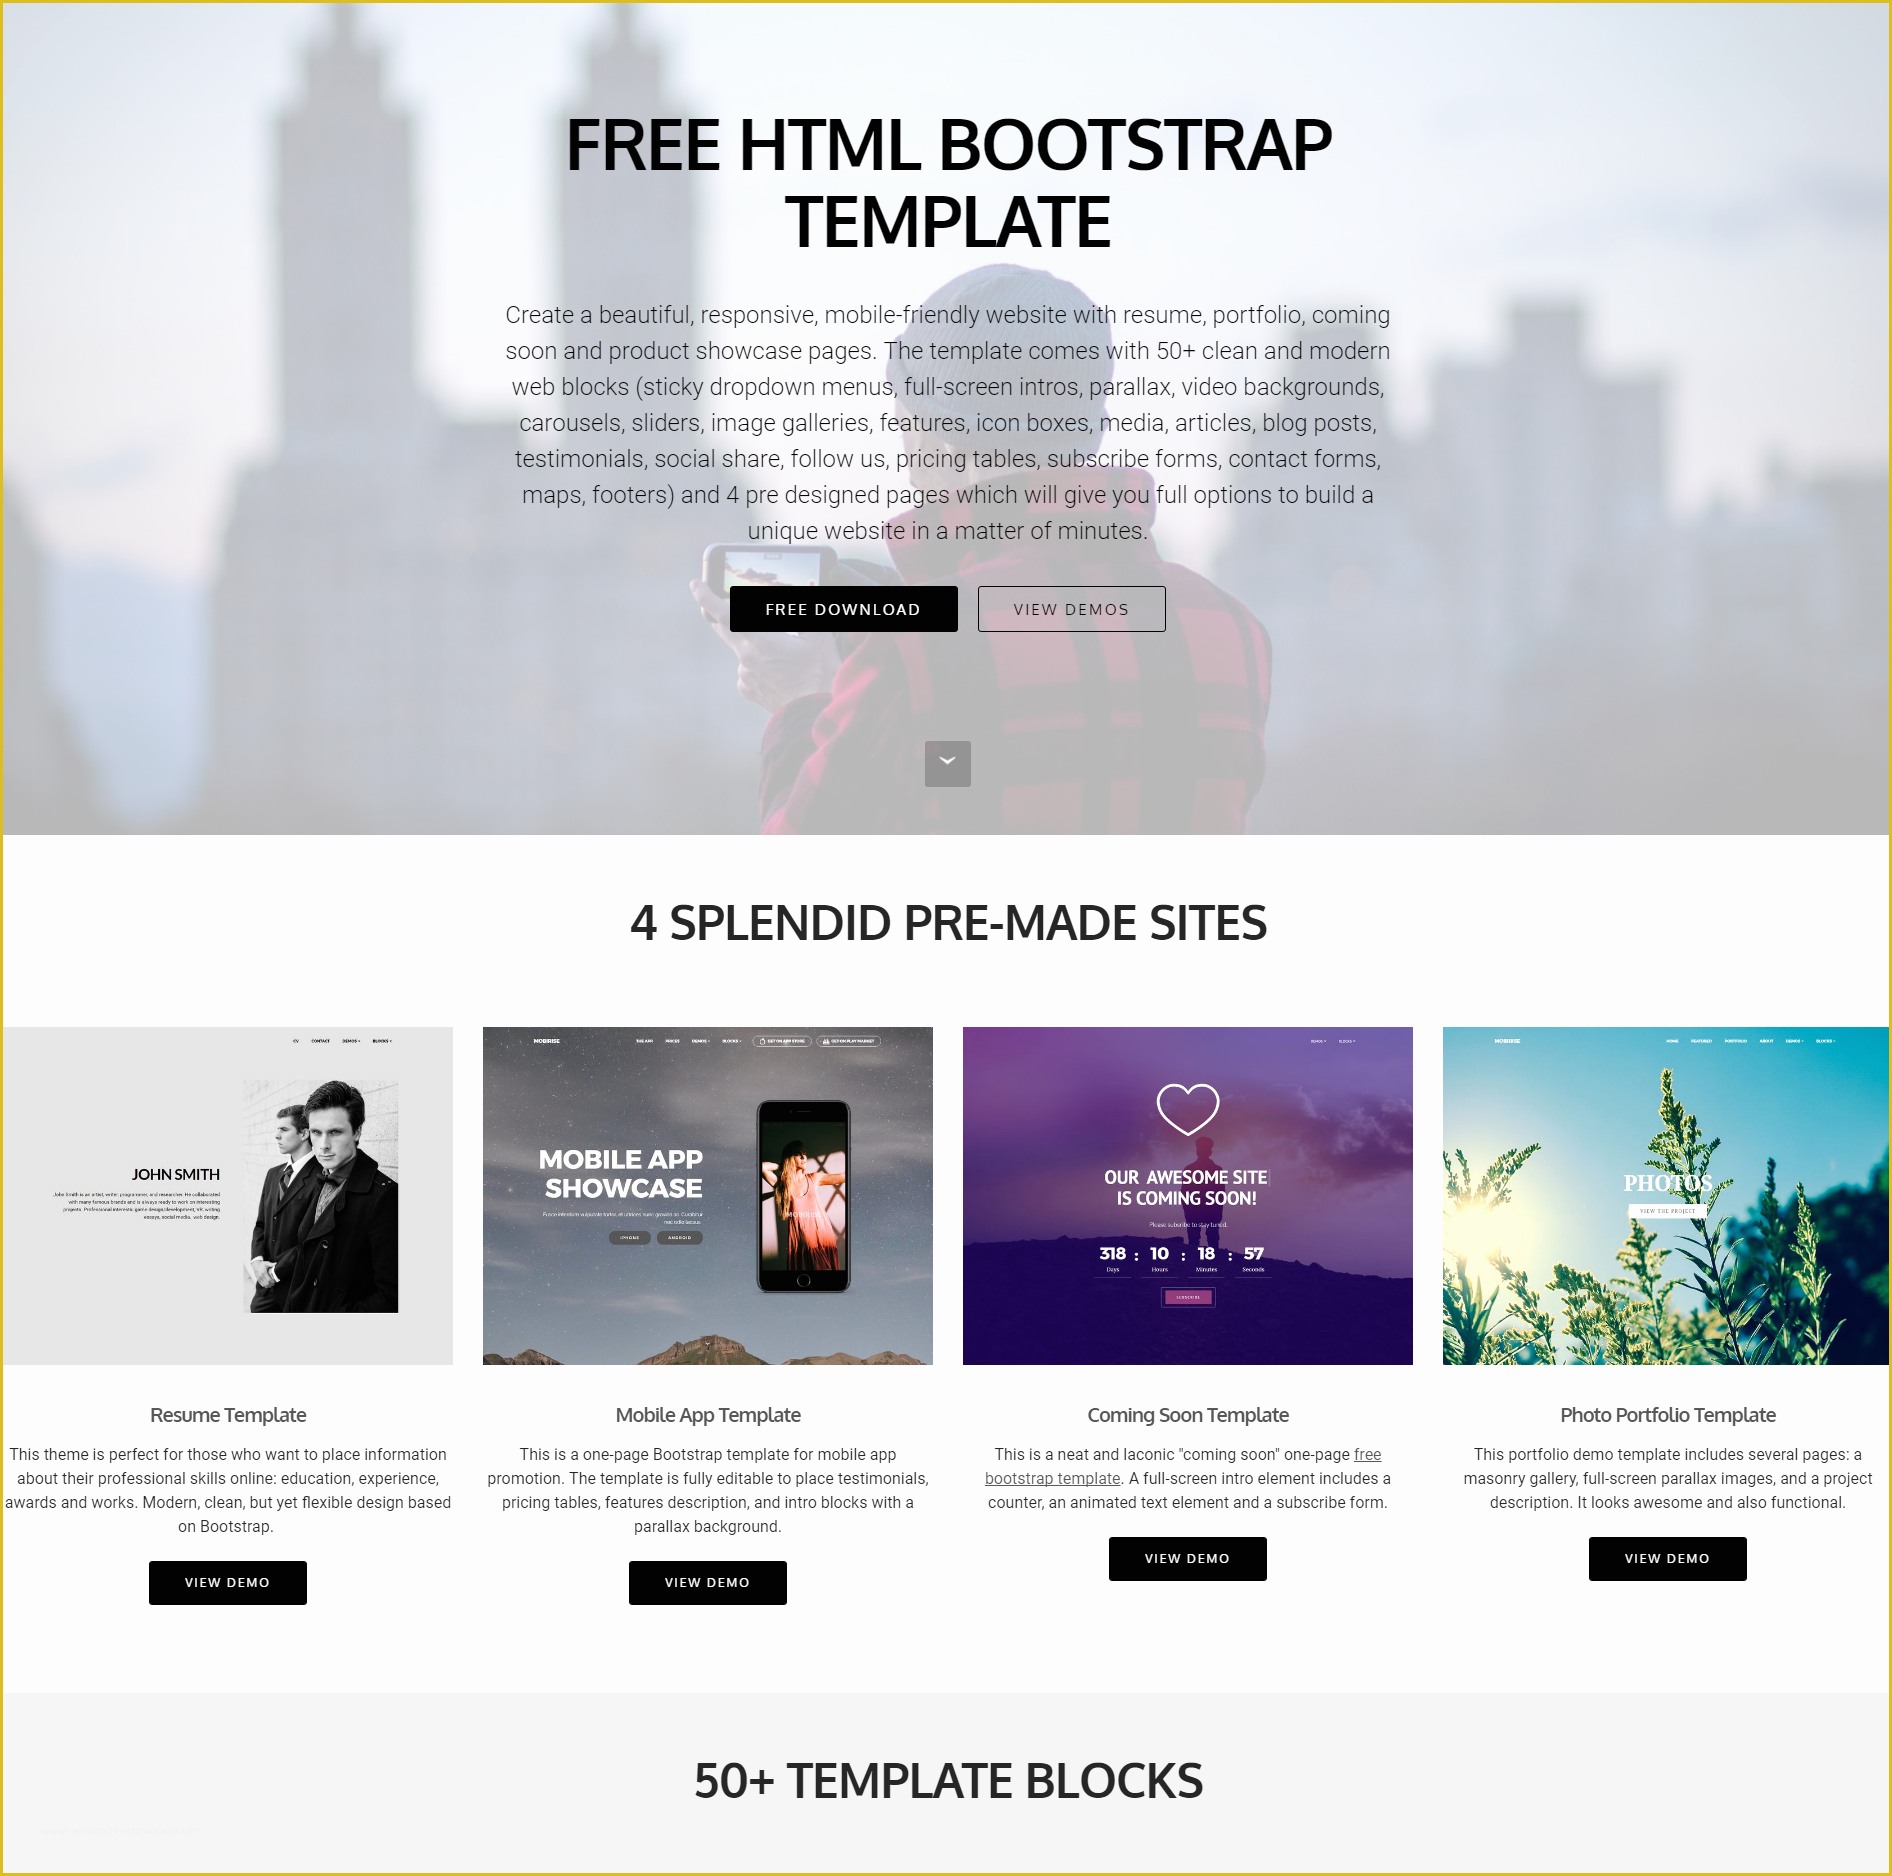 Free Website Design Templates Of 39 Brand New Free HTML Bootstrap Templates 2019